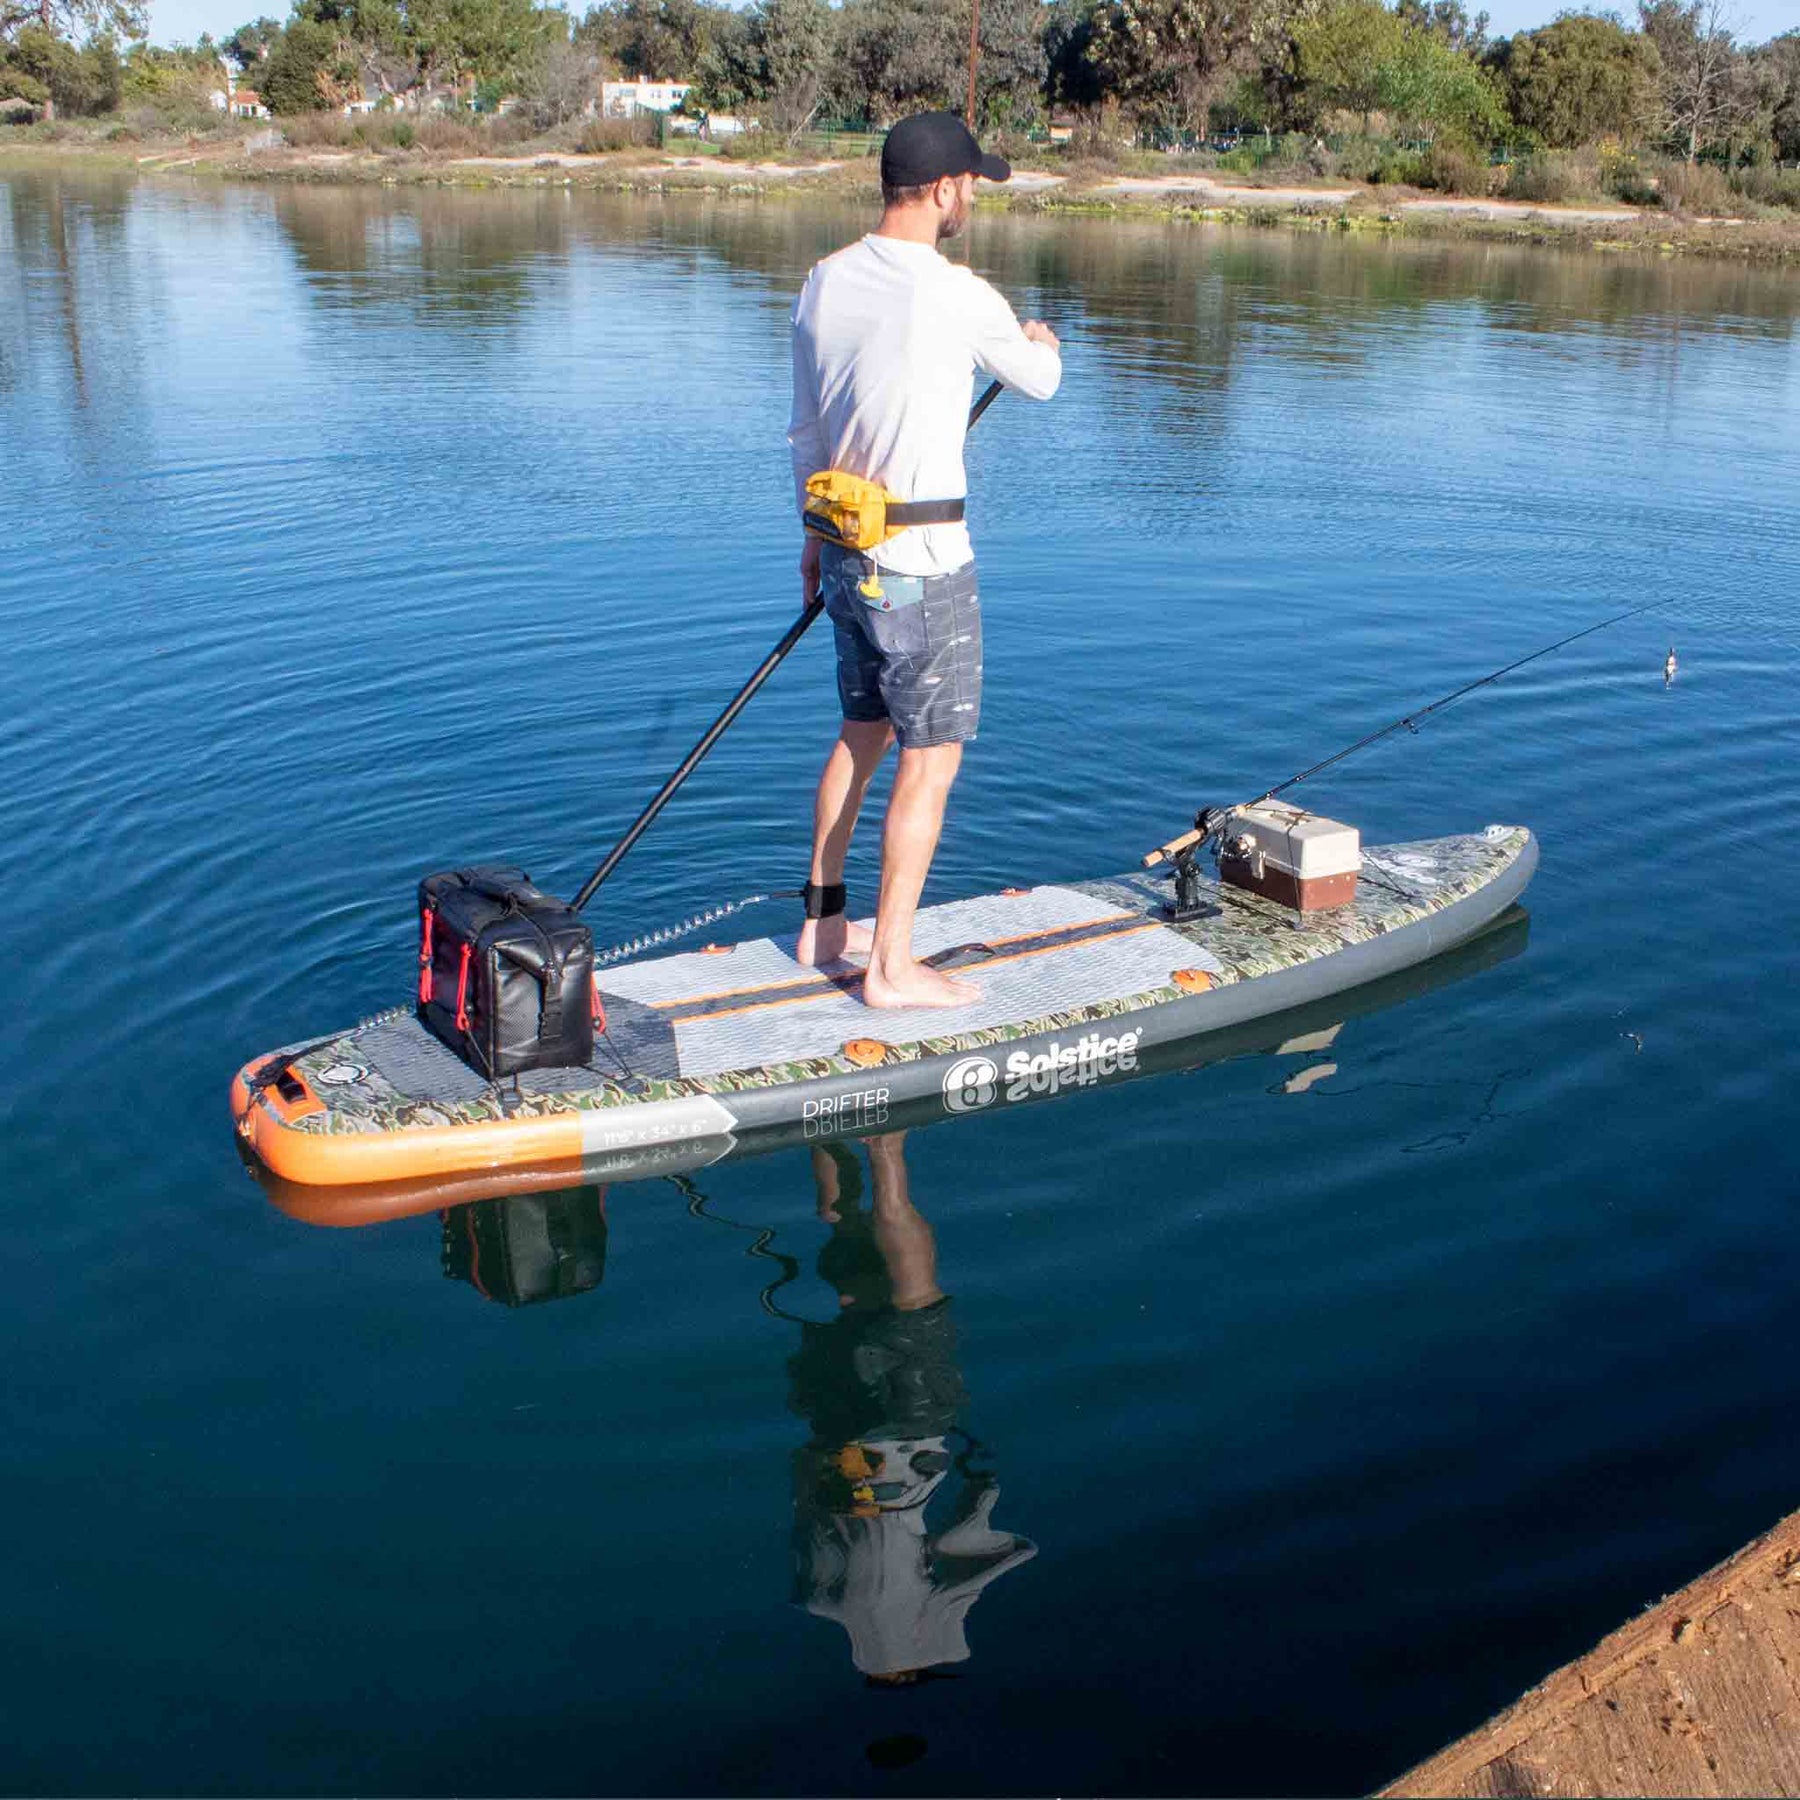 Solstice Watersports 11'6 Drifter Fishing Inflatable Stand Up Paddleboard